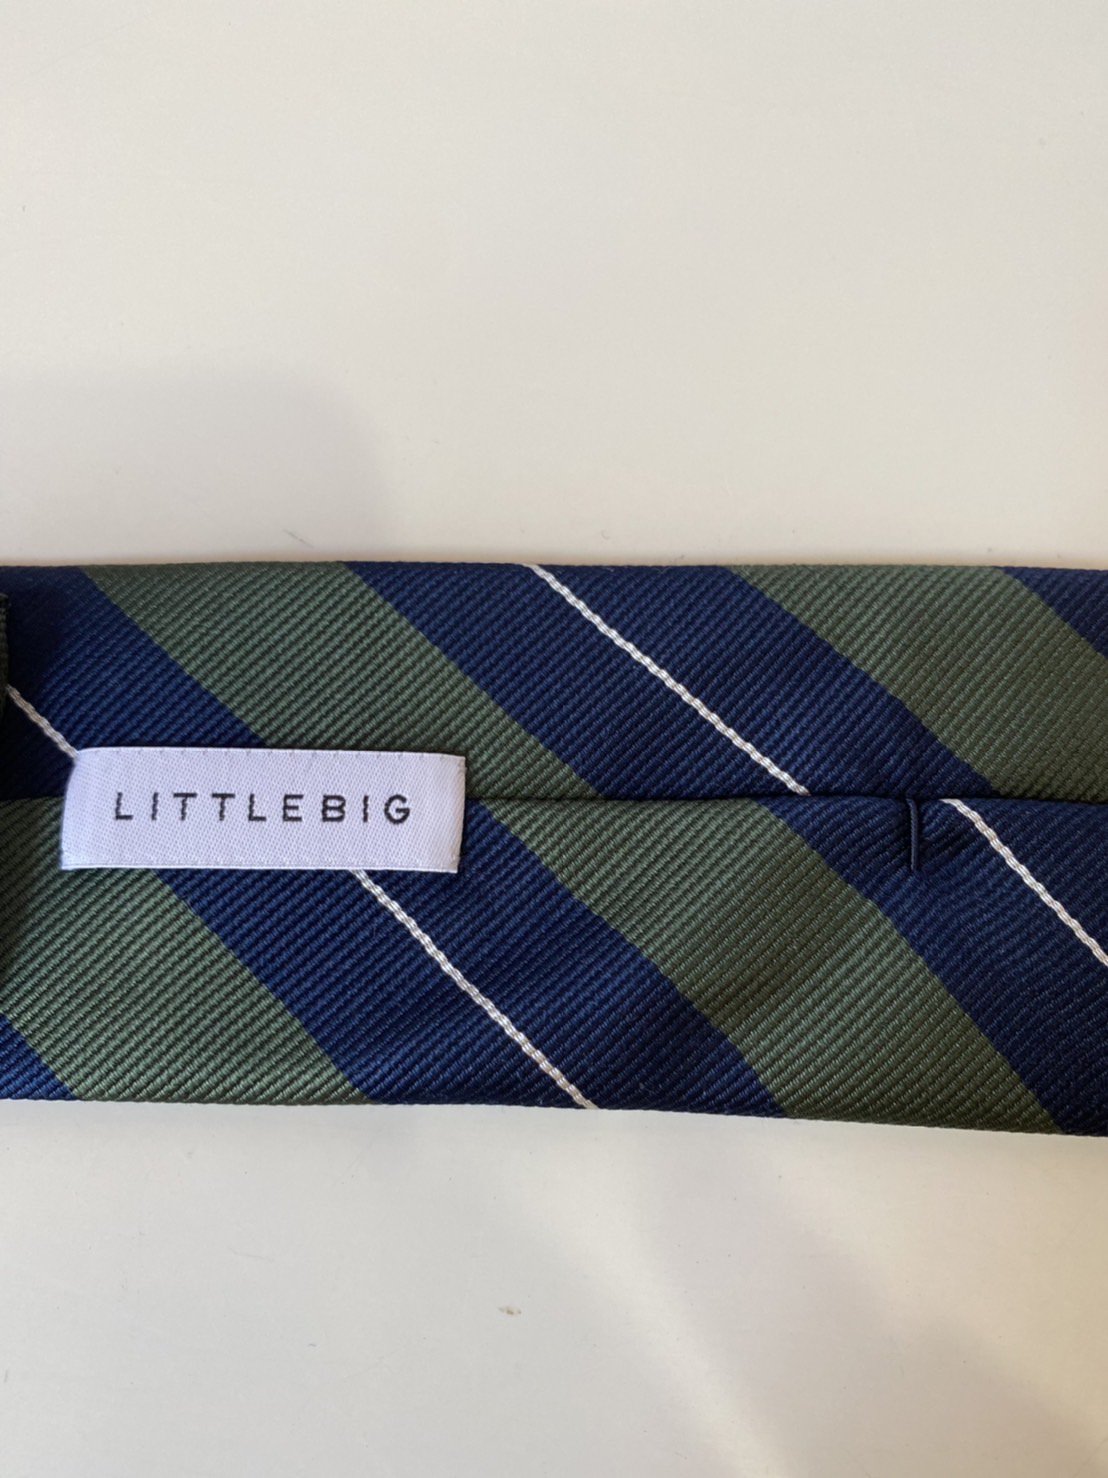 LITTLEBIG<br />Regimental Tie / Green<img class='new_mark_img2' src='https://img.shop-pro.jp/img/new/icons14.gif' style='border:none;display:inline;margin:0px;padding:0px;width:auto;' />